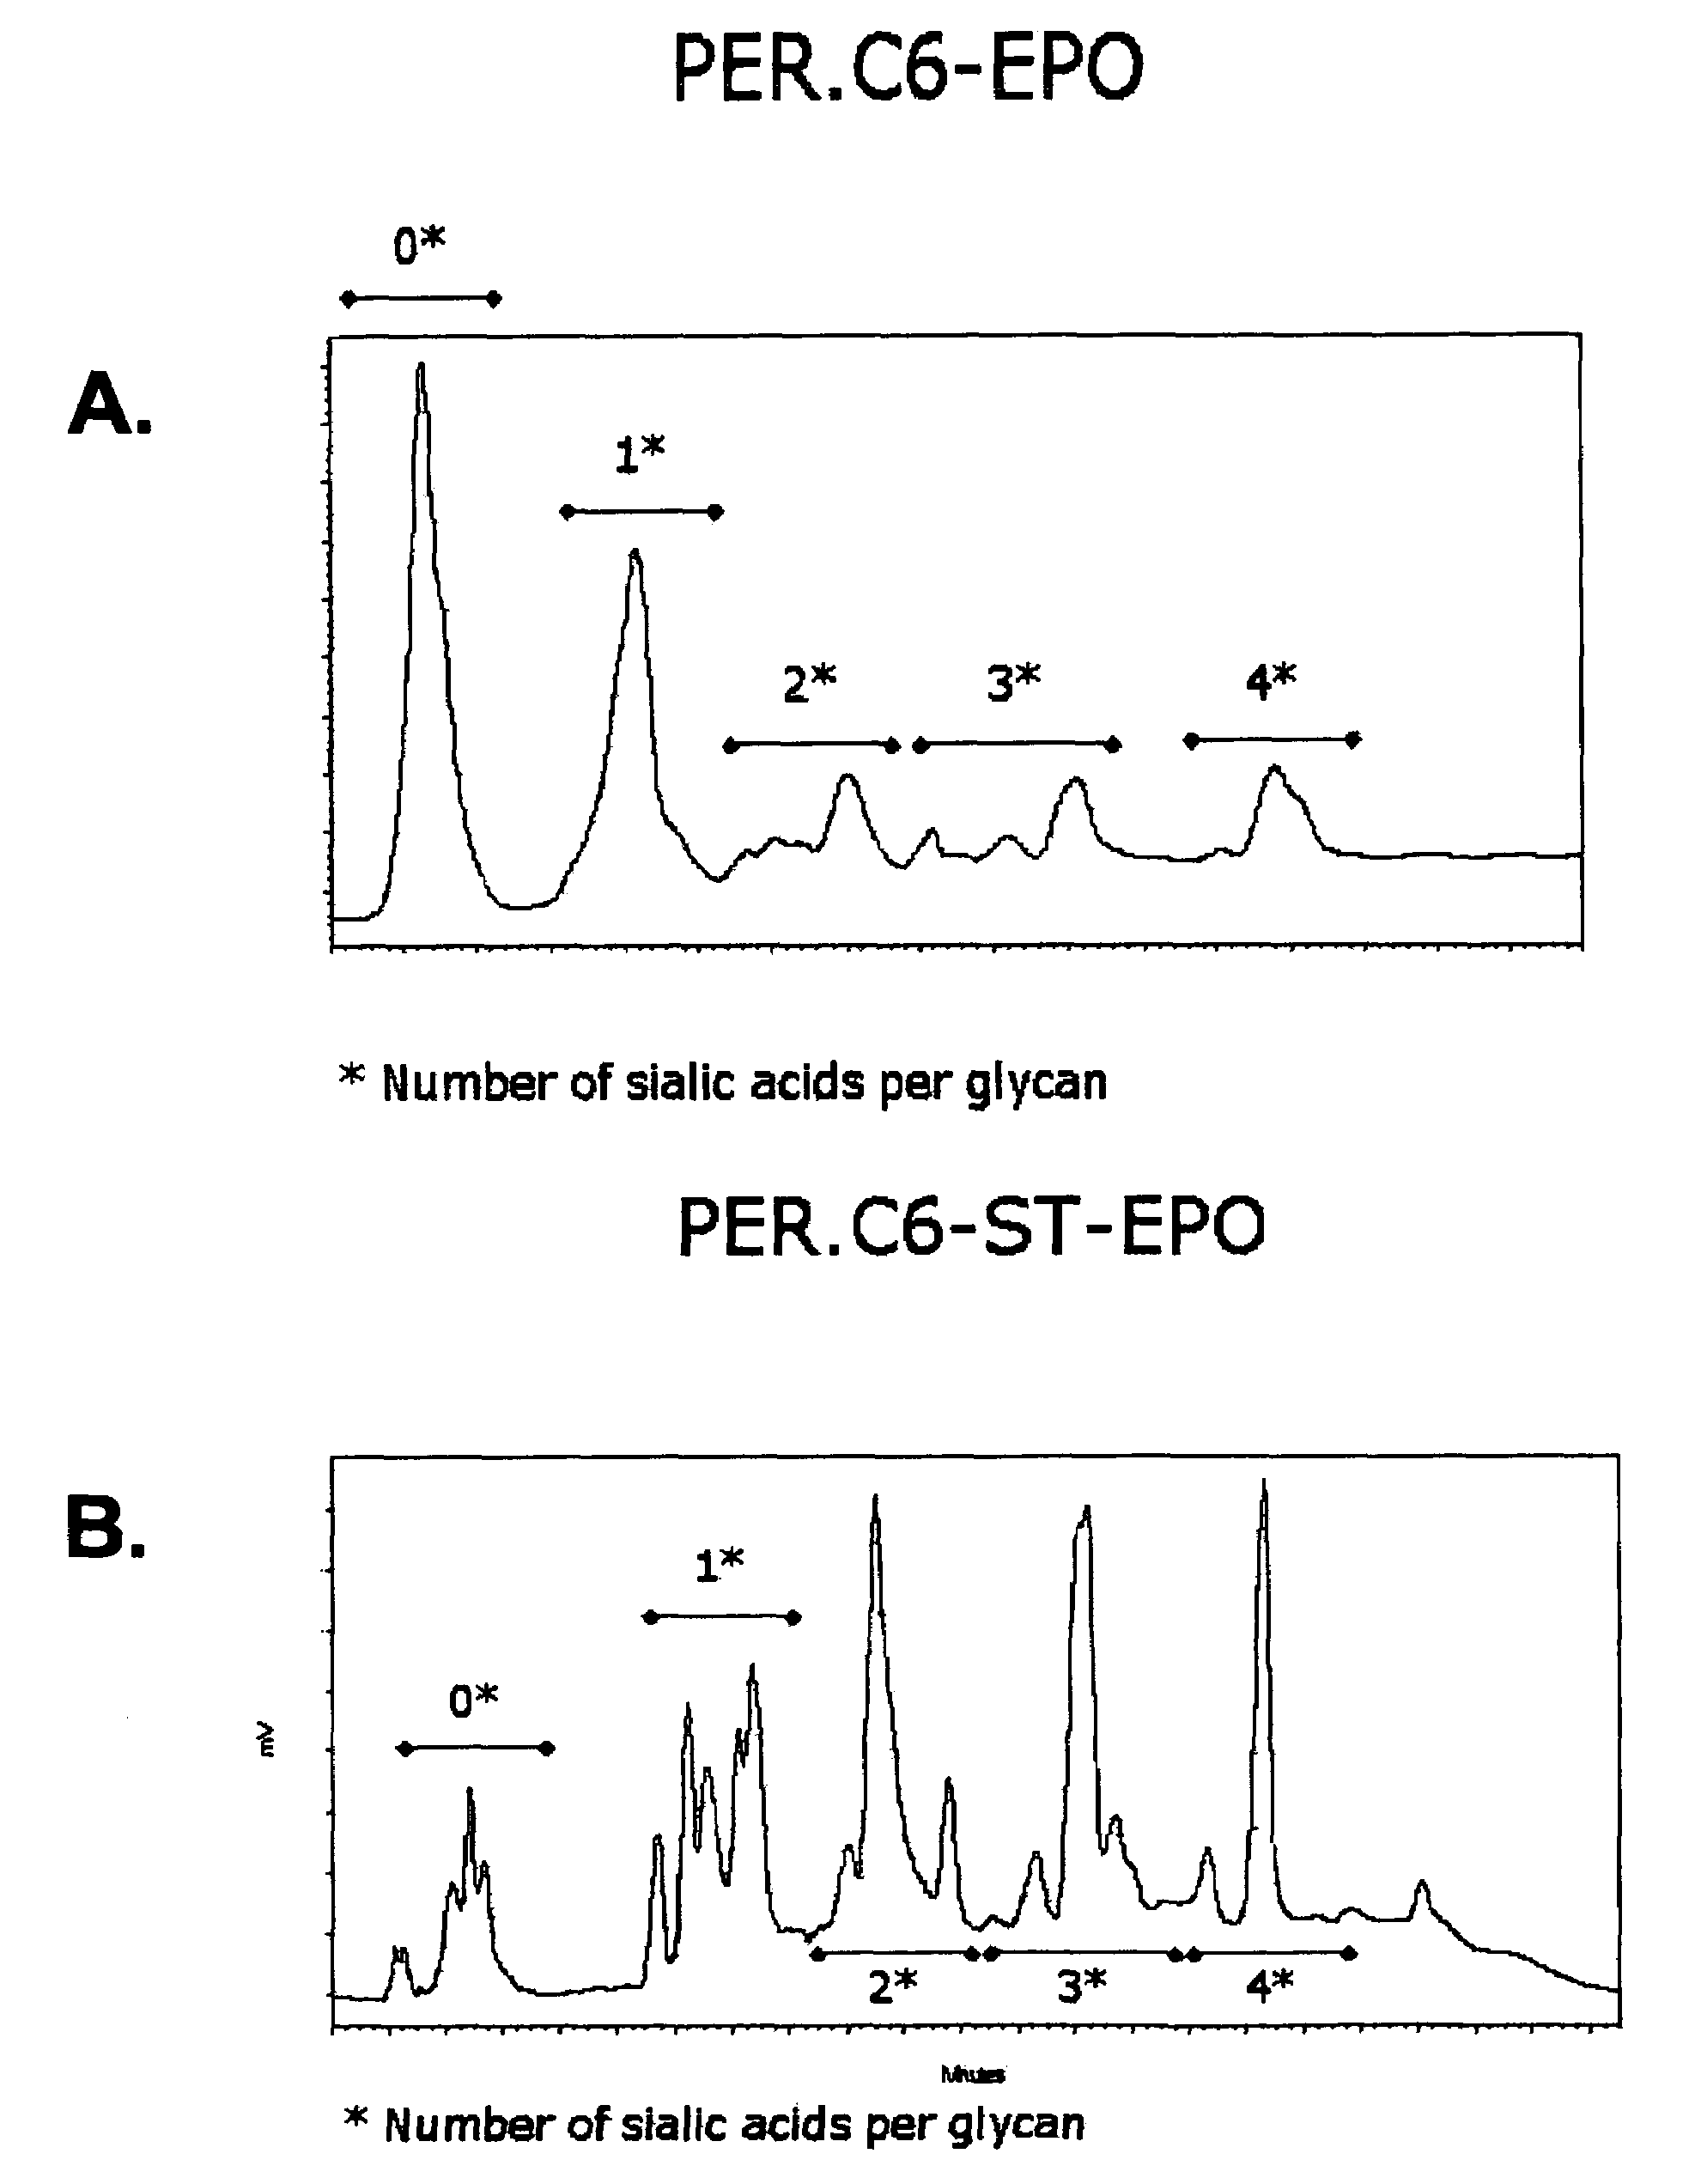 Compositions of erythropoietin isoforms comprising Lewis-X structures and high sialic acid content